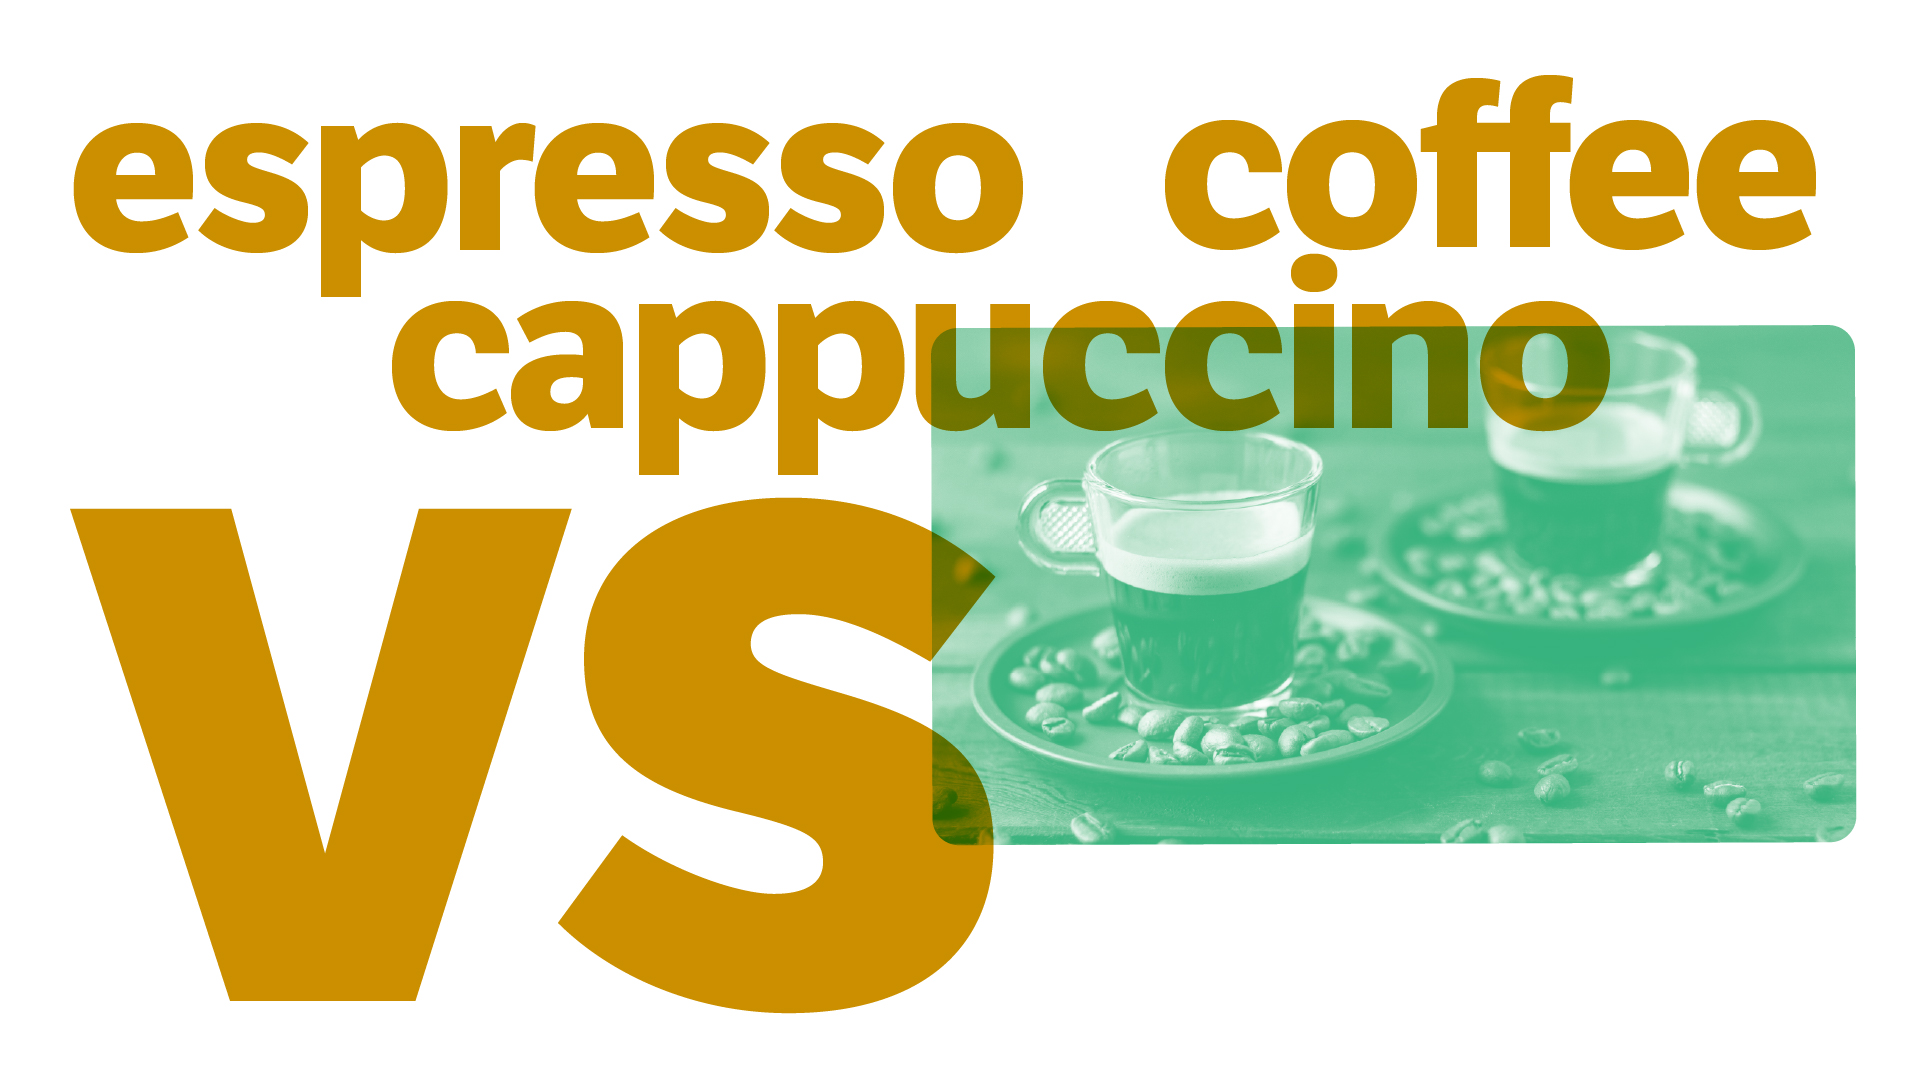 What is espresso? A type of coffee and a method of making it.